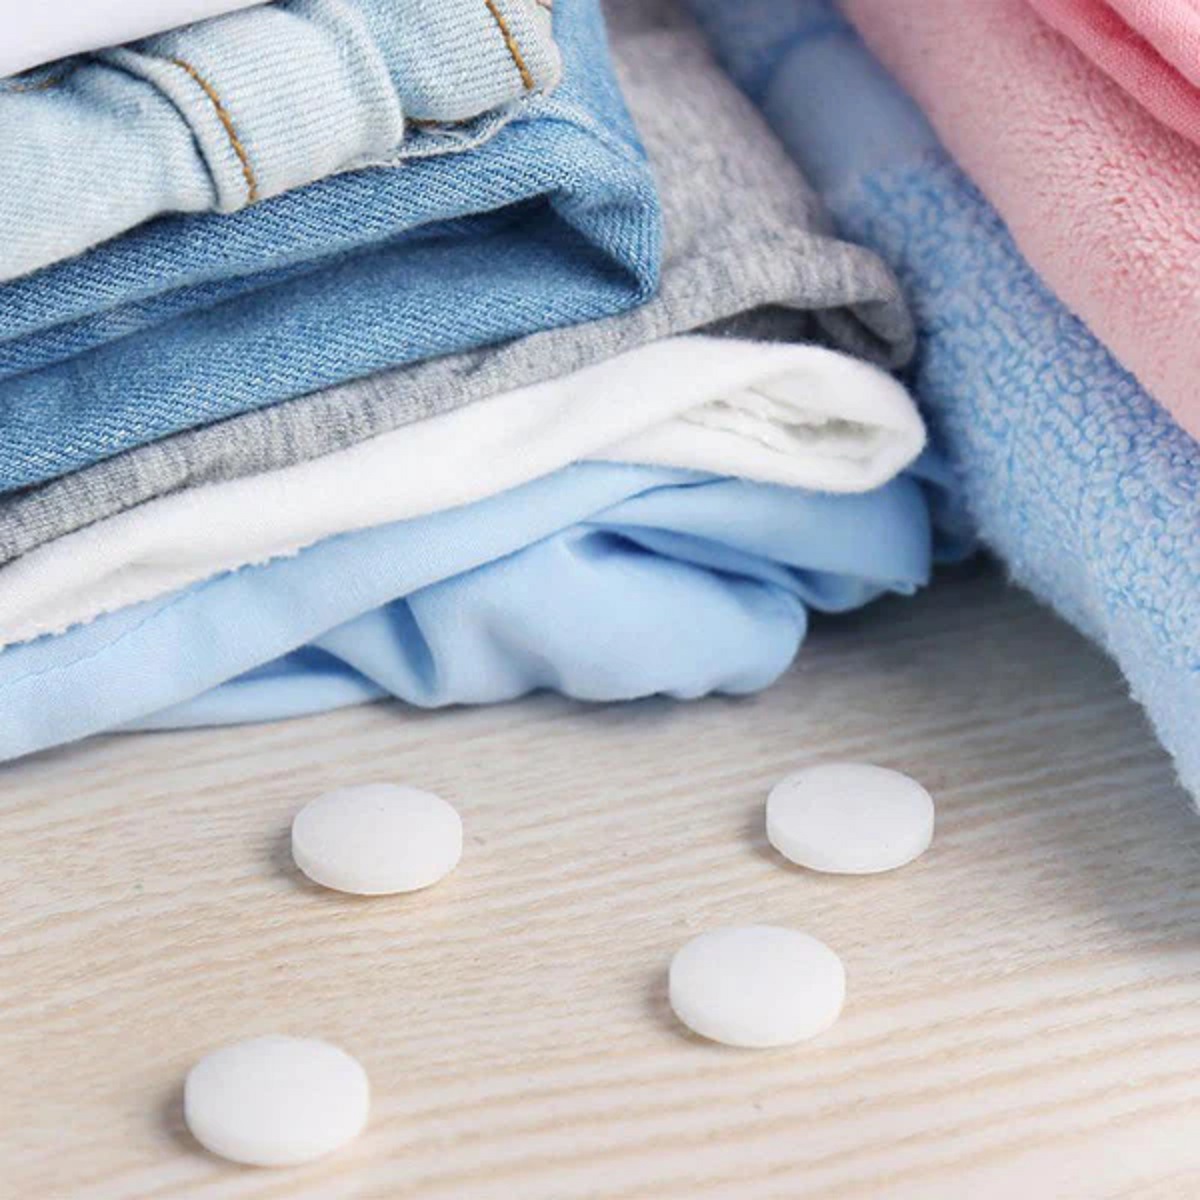 https://storables.com/wp-content/uploads/2023/06/how-to-use-mothballs-in-a-closet-1687960540.jpg